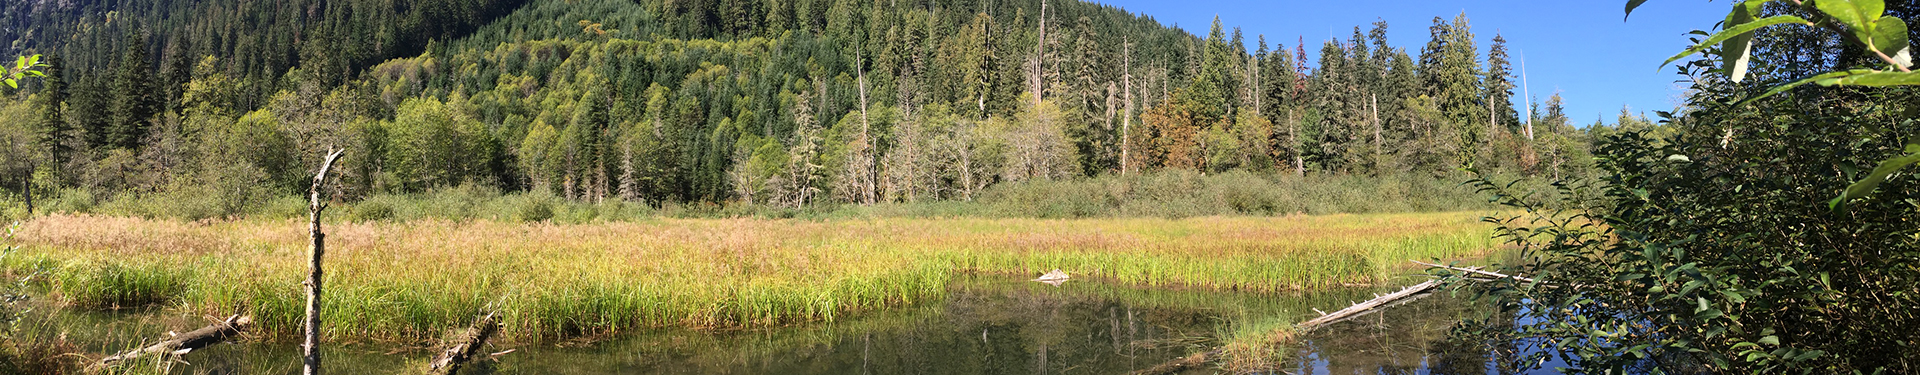 Tulalip Natural Resources Department image of the top of a beaver lodge in the wild